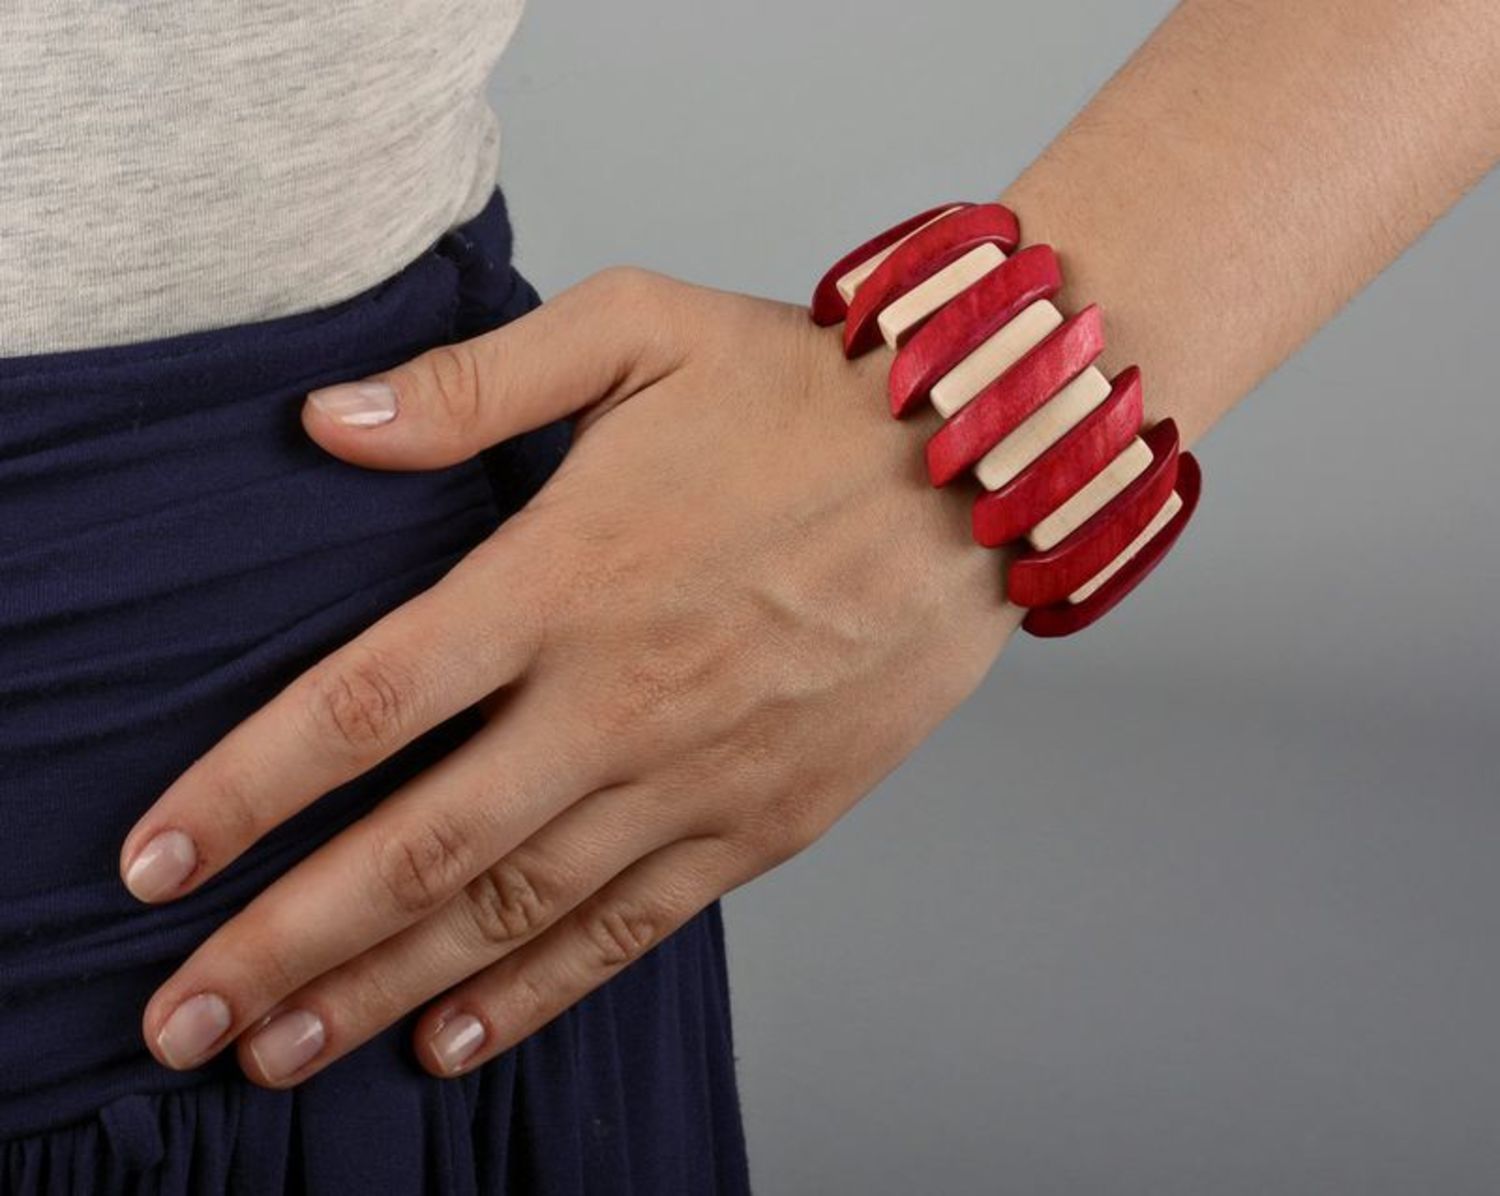 Wrist bracelet of red and white colors on elastic band photo 5